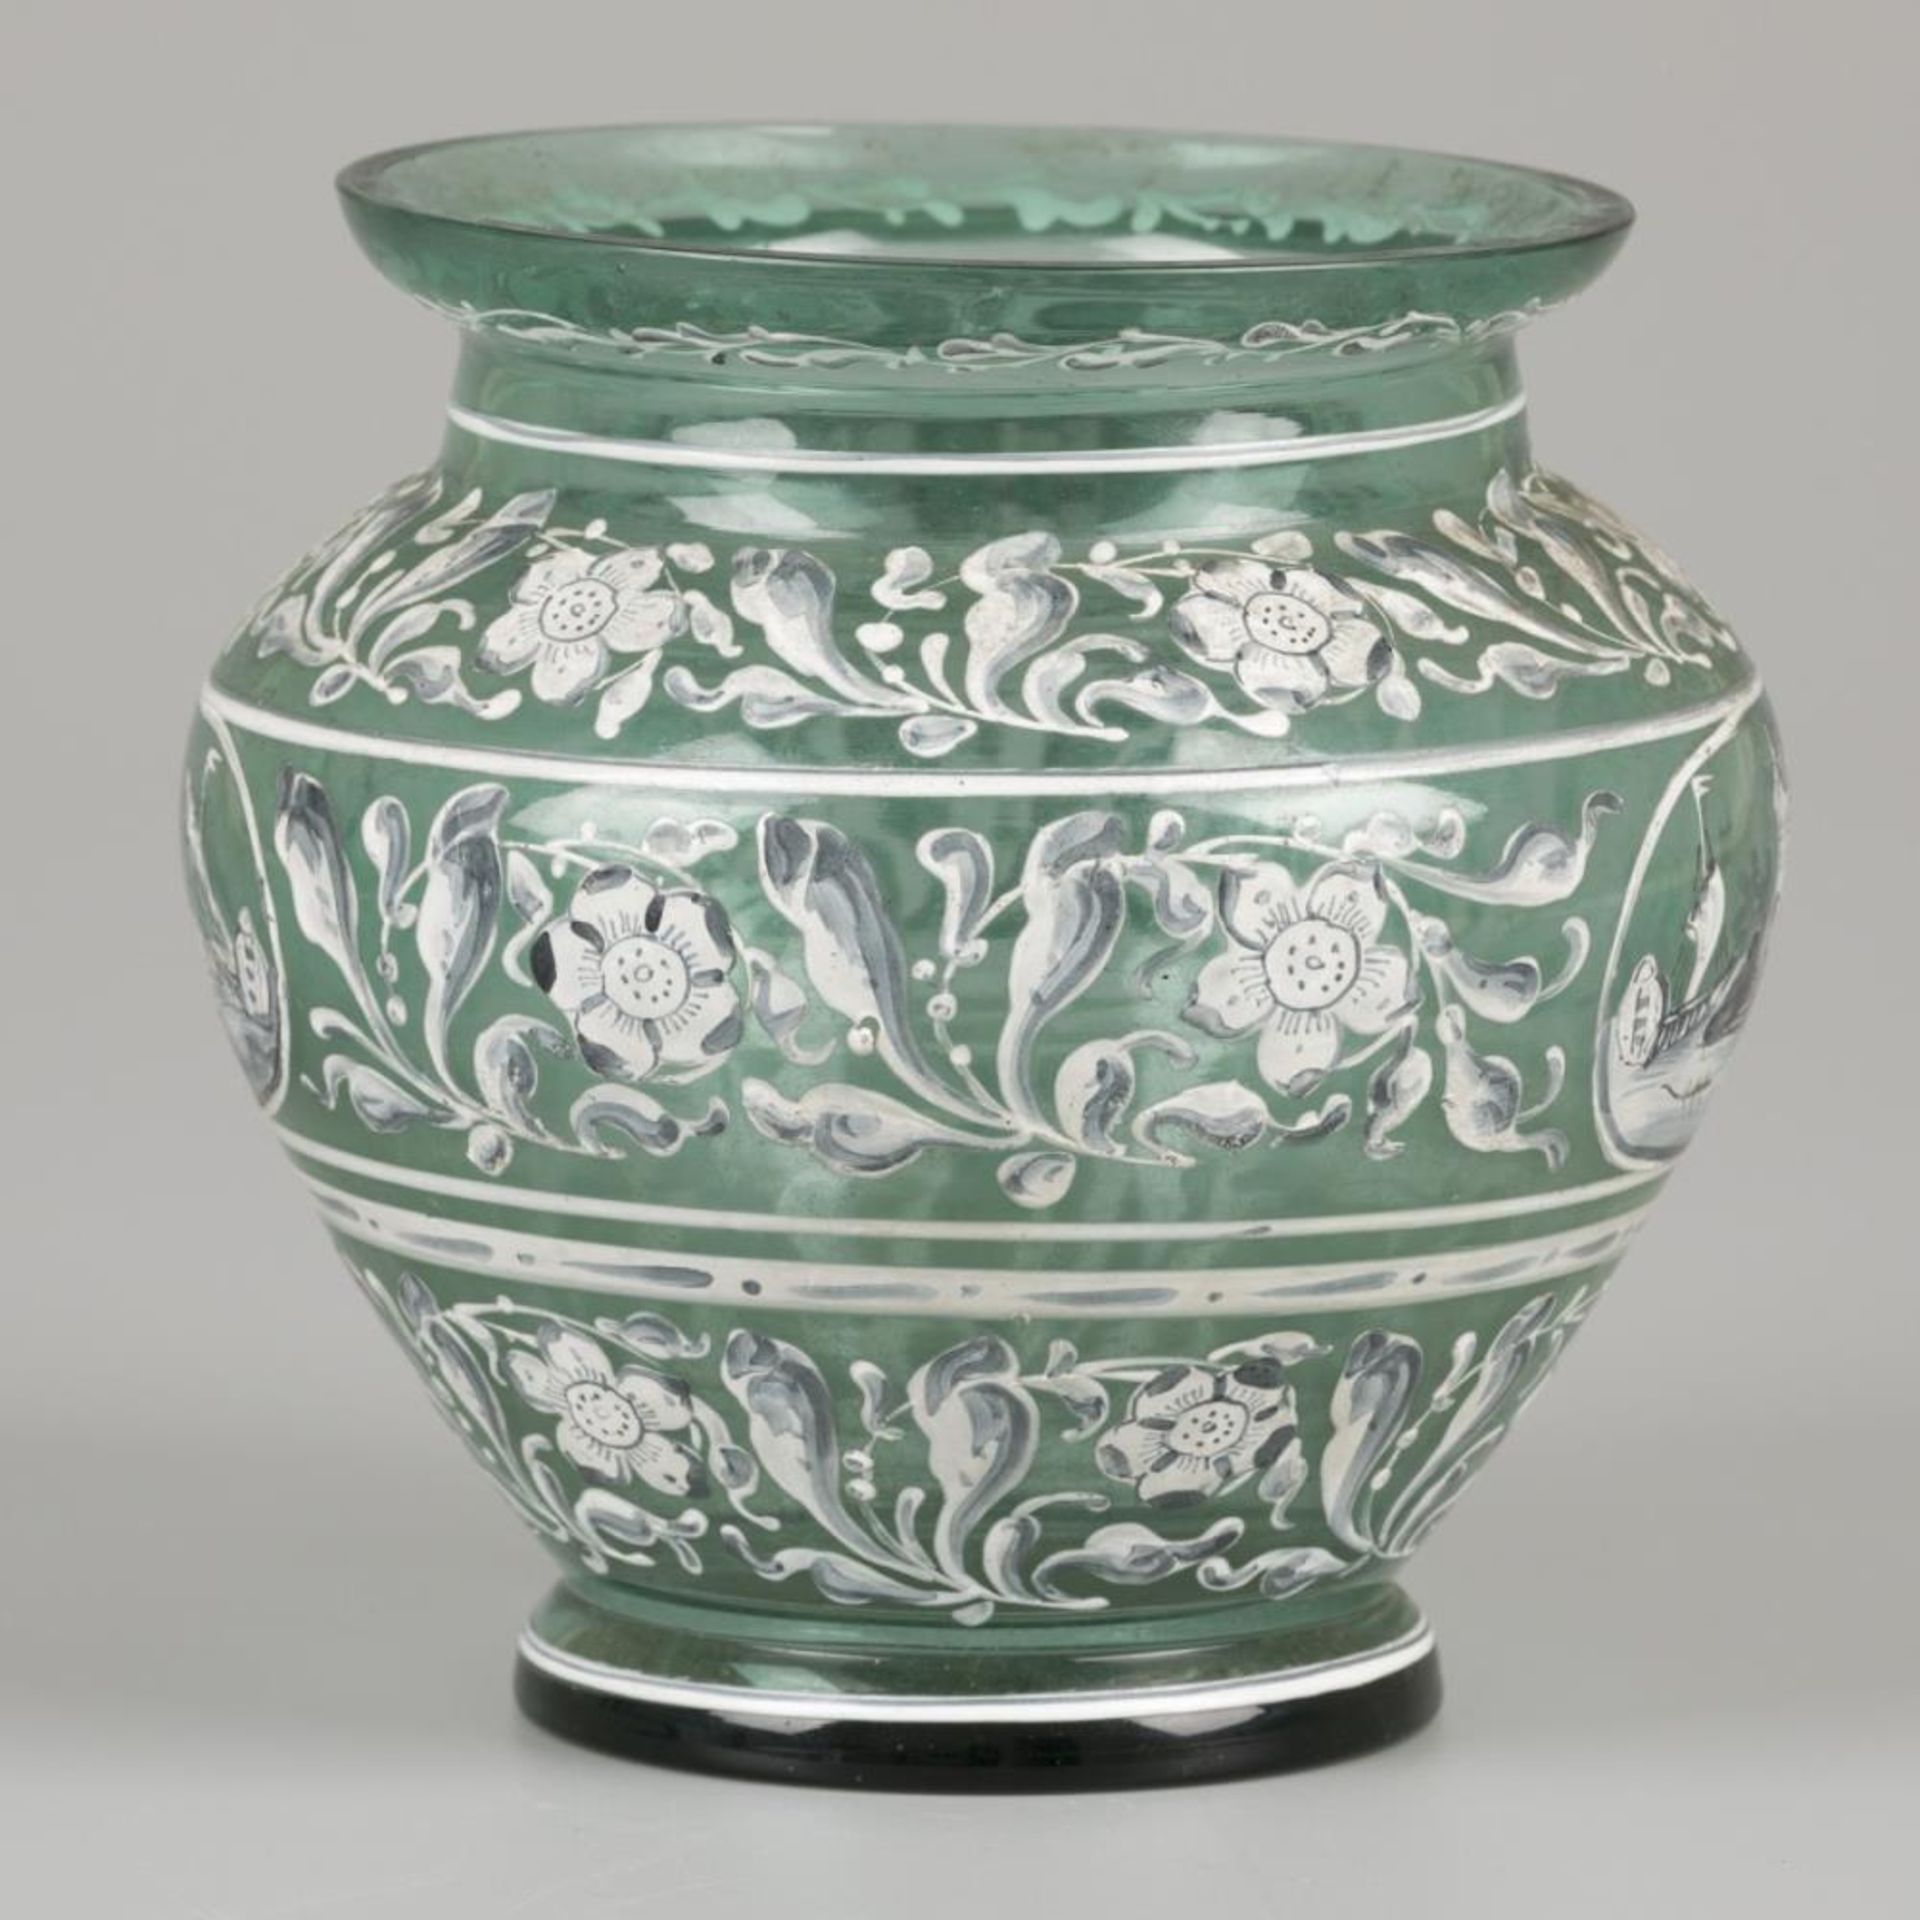 A glass vase with enamelled motif, Italy, 19th century. - Image 5 of 7